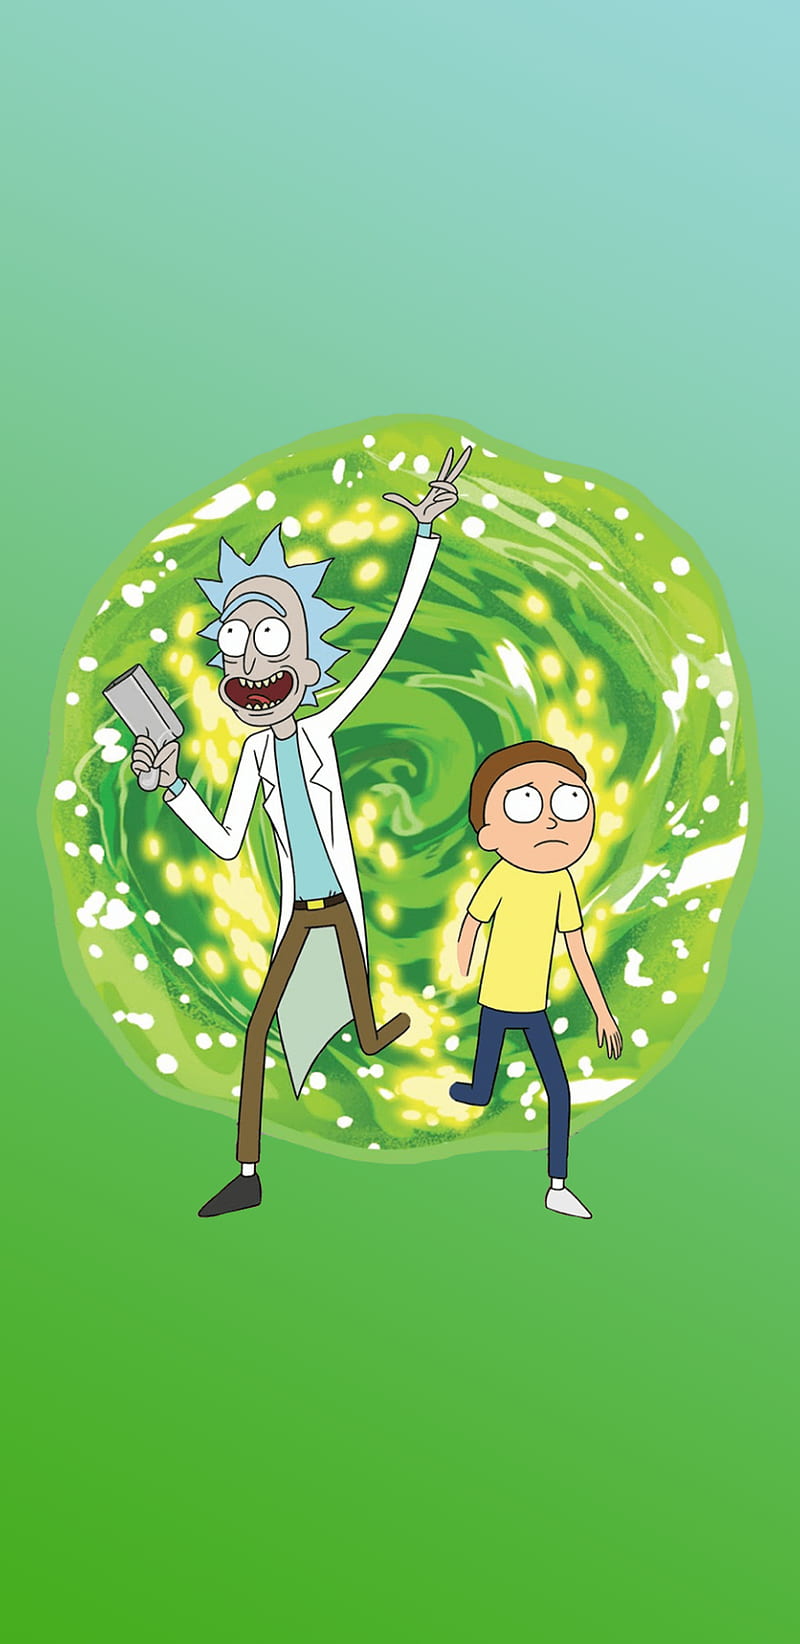 Rick and Morty, adult swim, back to the future, cartoon network, cartoons, morty smith, rick sanchez, science, HD phone wallpaper